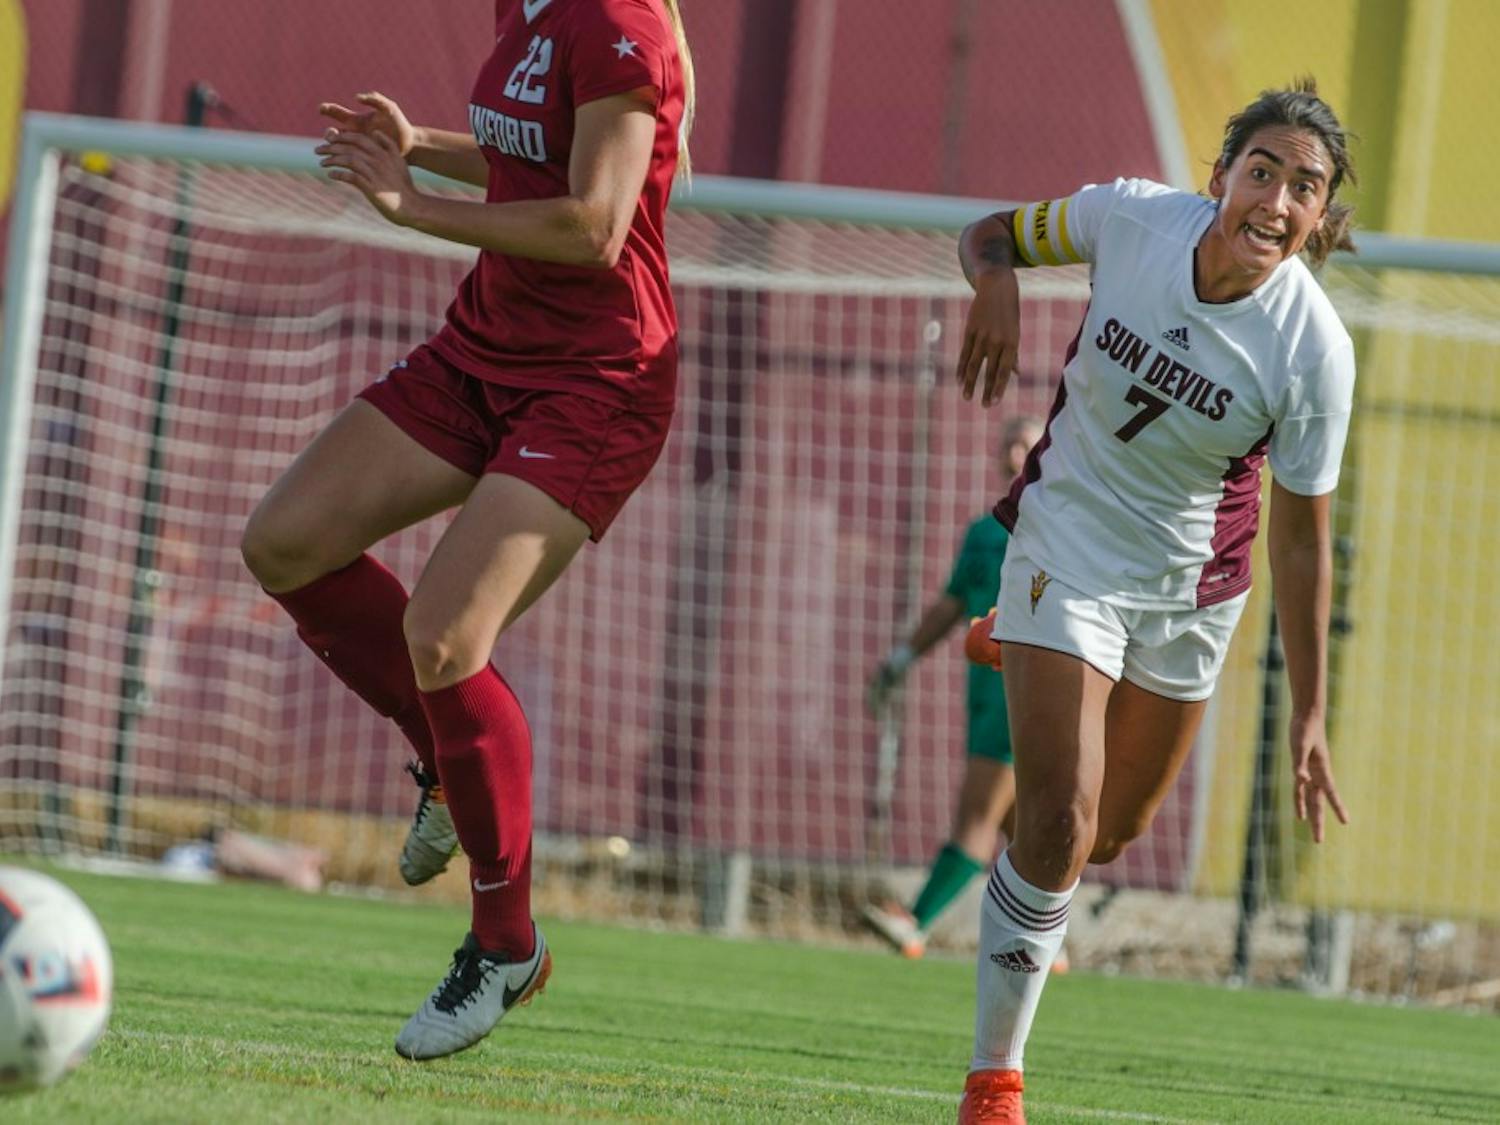 ASU Sophomore Lucy Lara, rght, chases the ball during the game against Stanford at the Sun Devil Soccer Stadium on Sunday, Oct. 30, 2016.